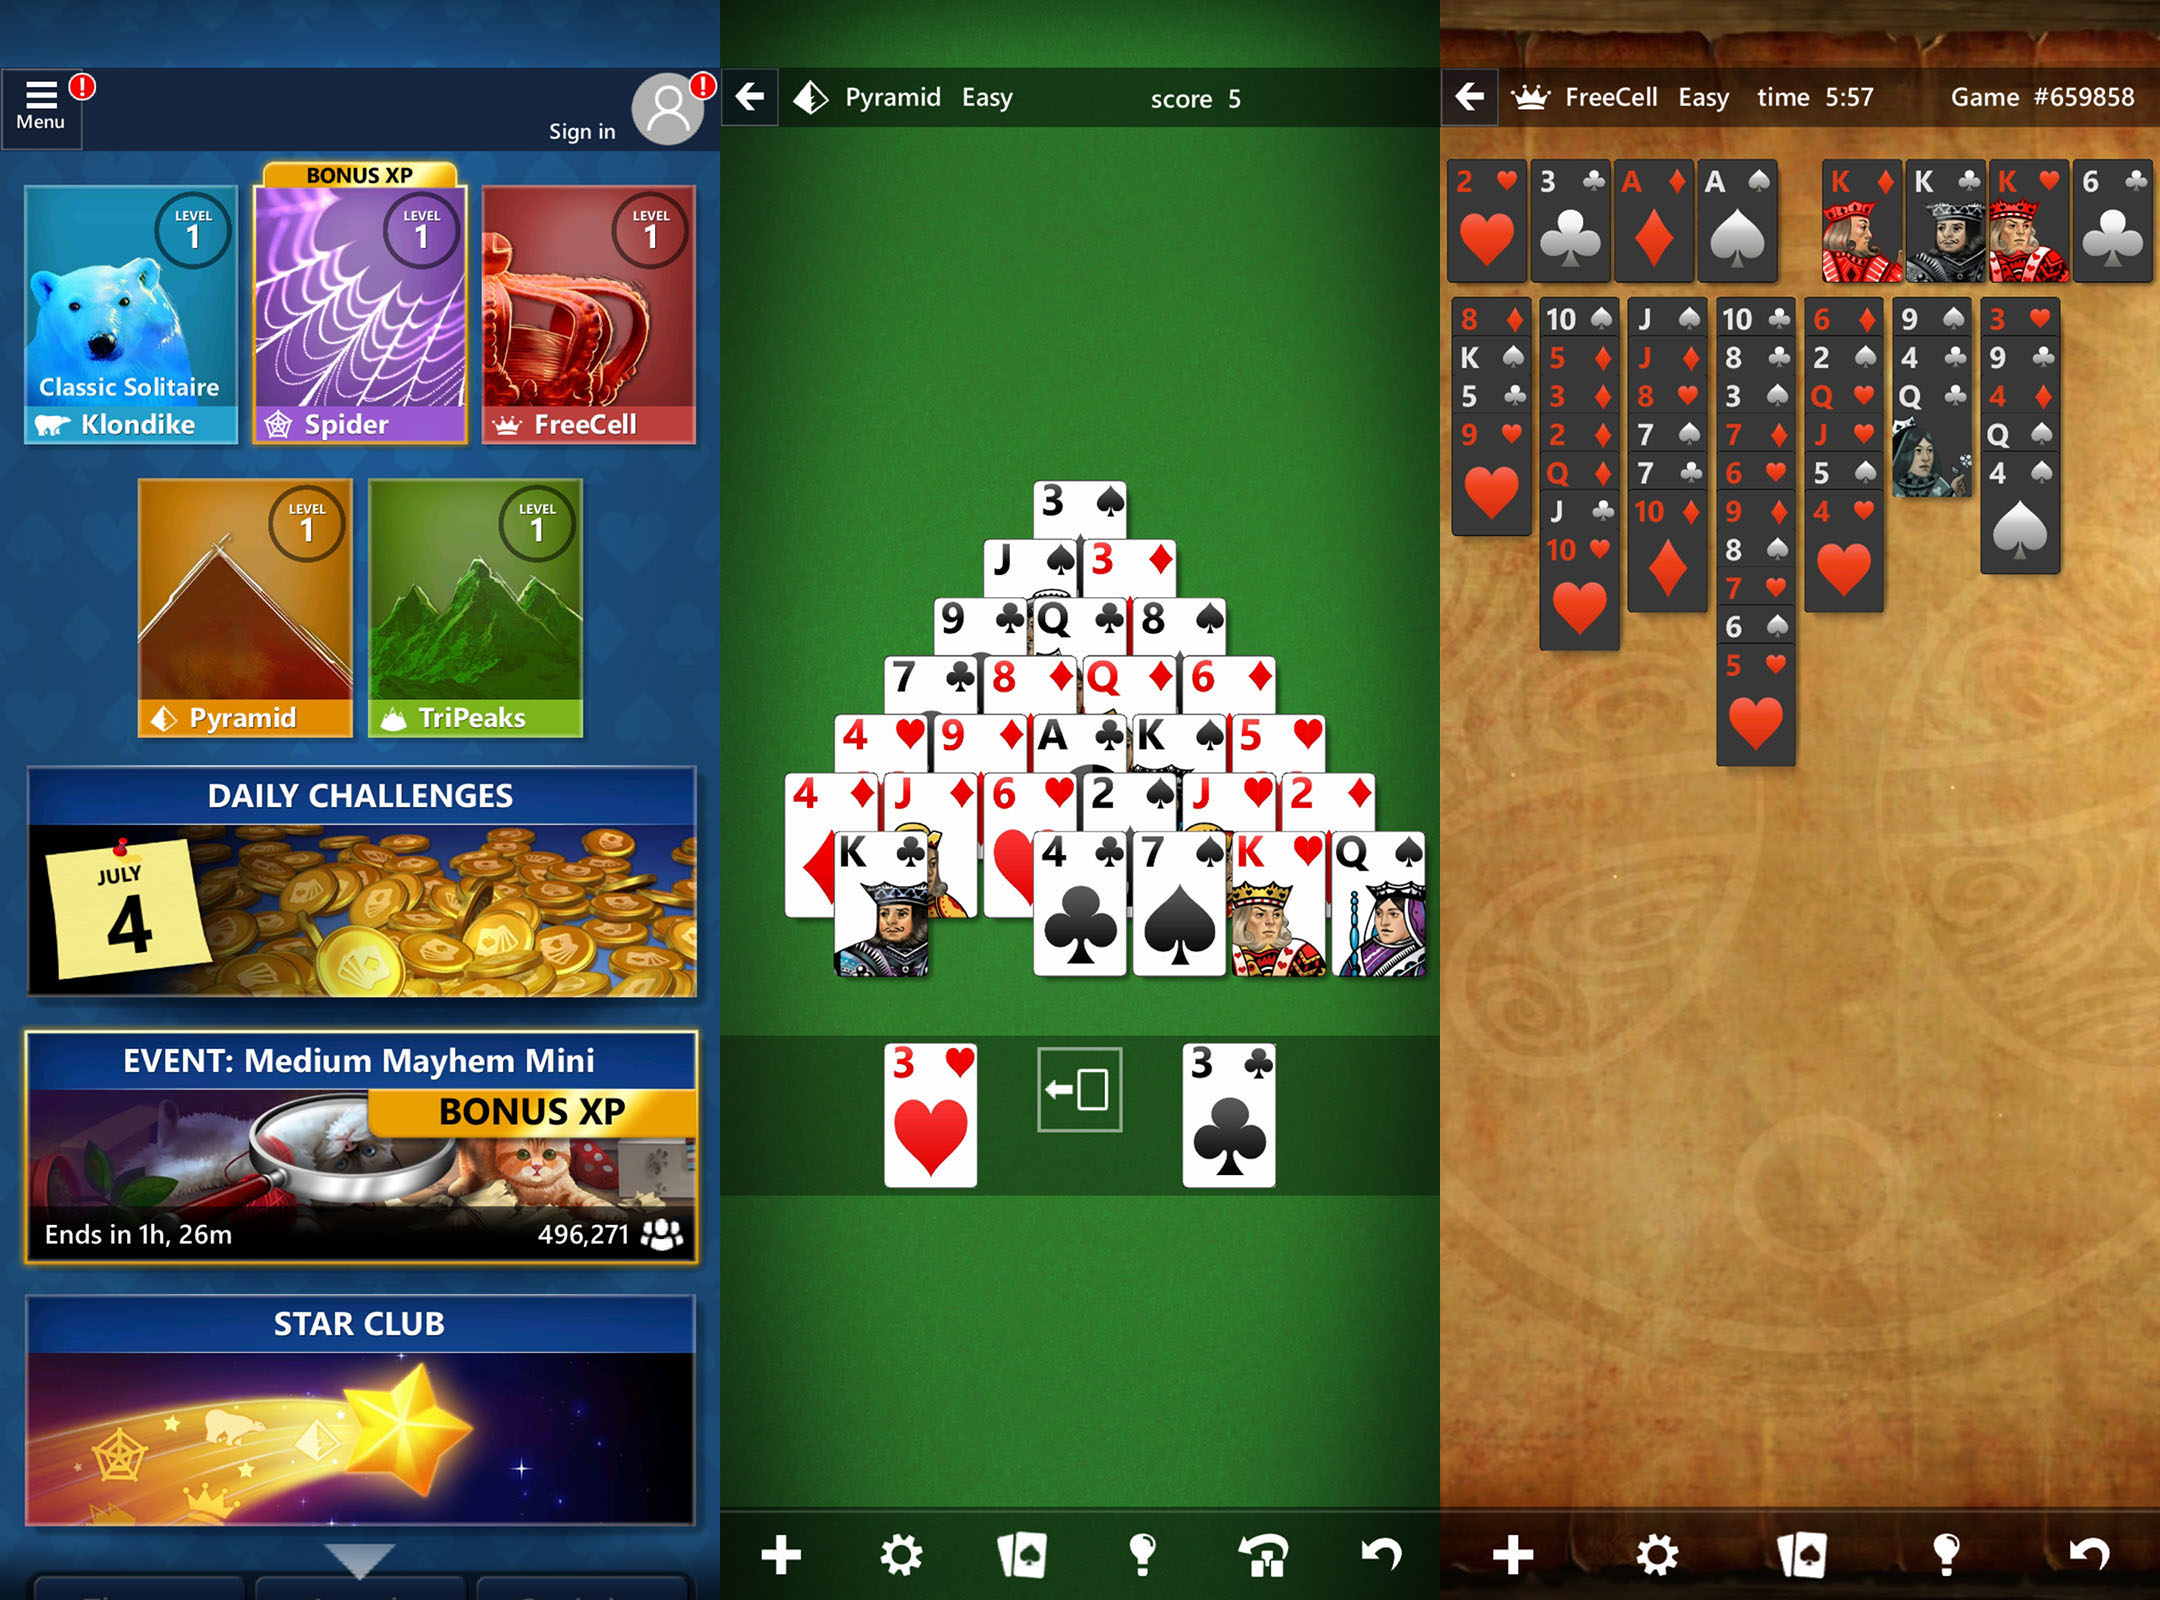 microsoft solitaire collection will not open